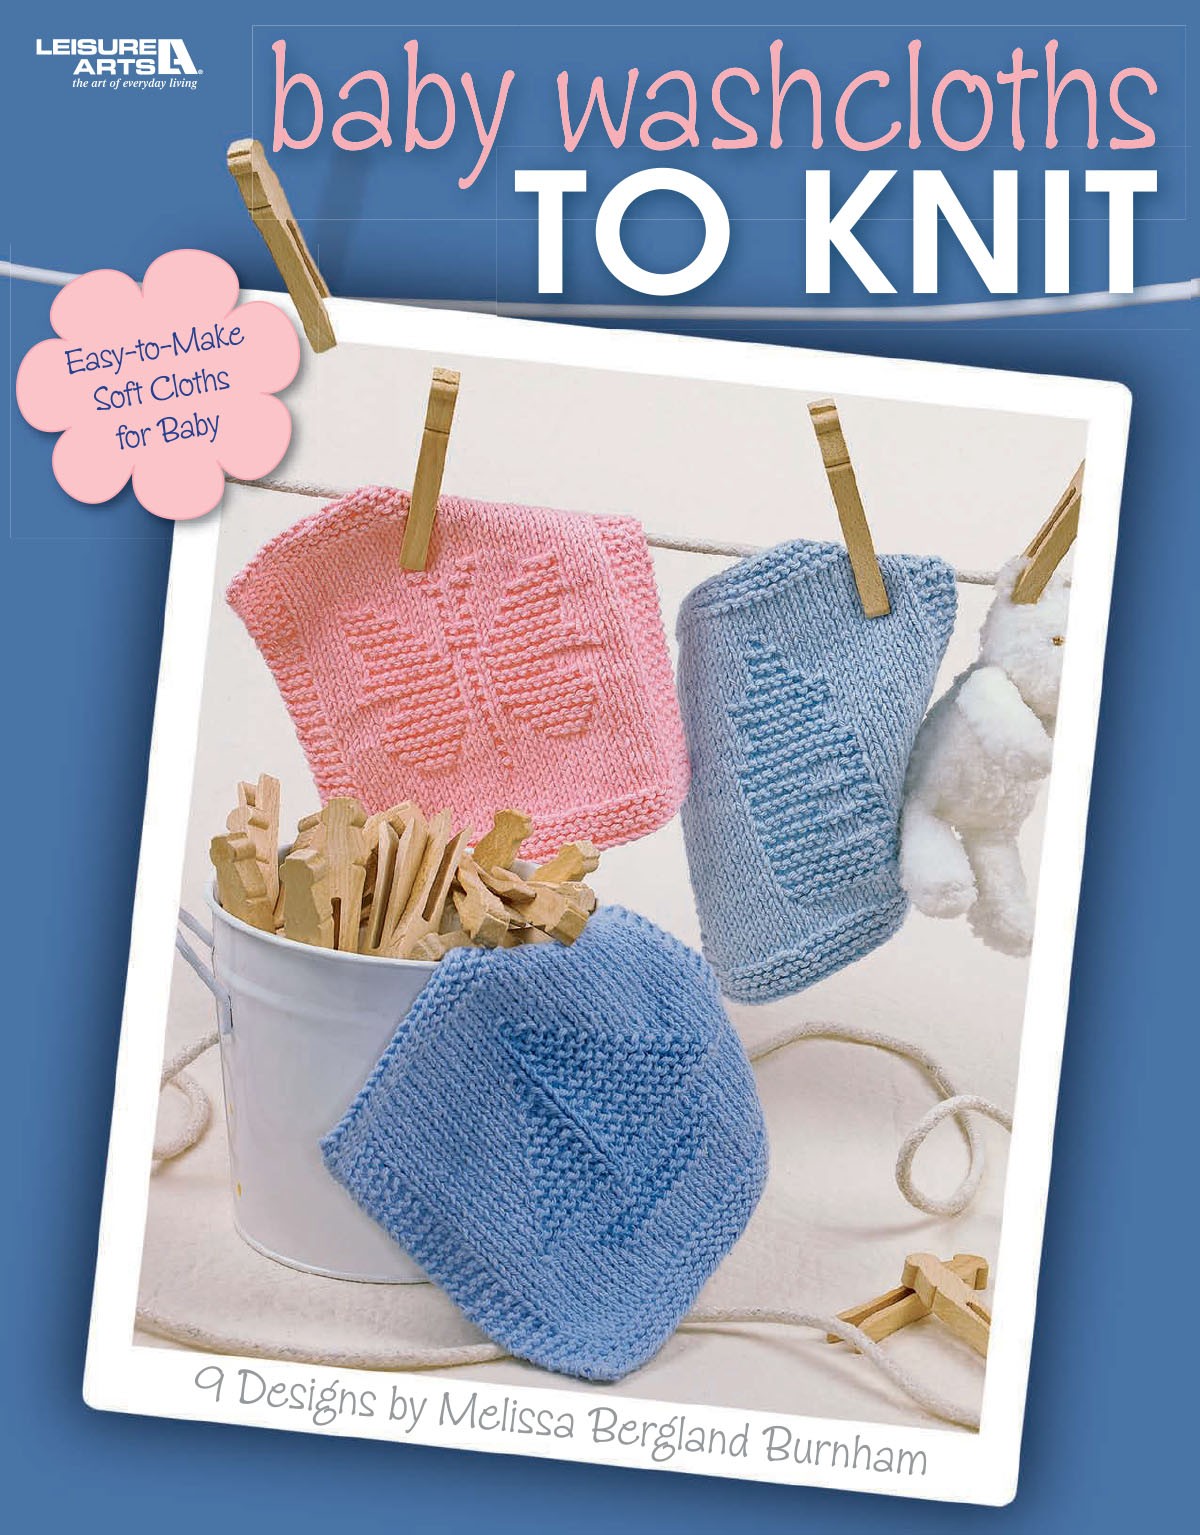 Baby Washcloths to Knit